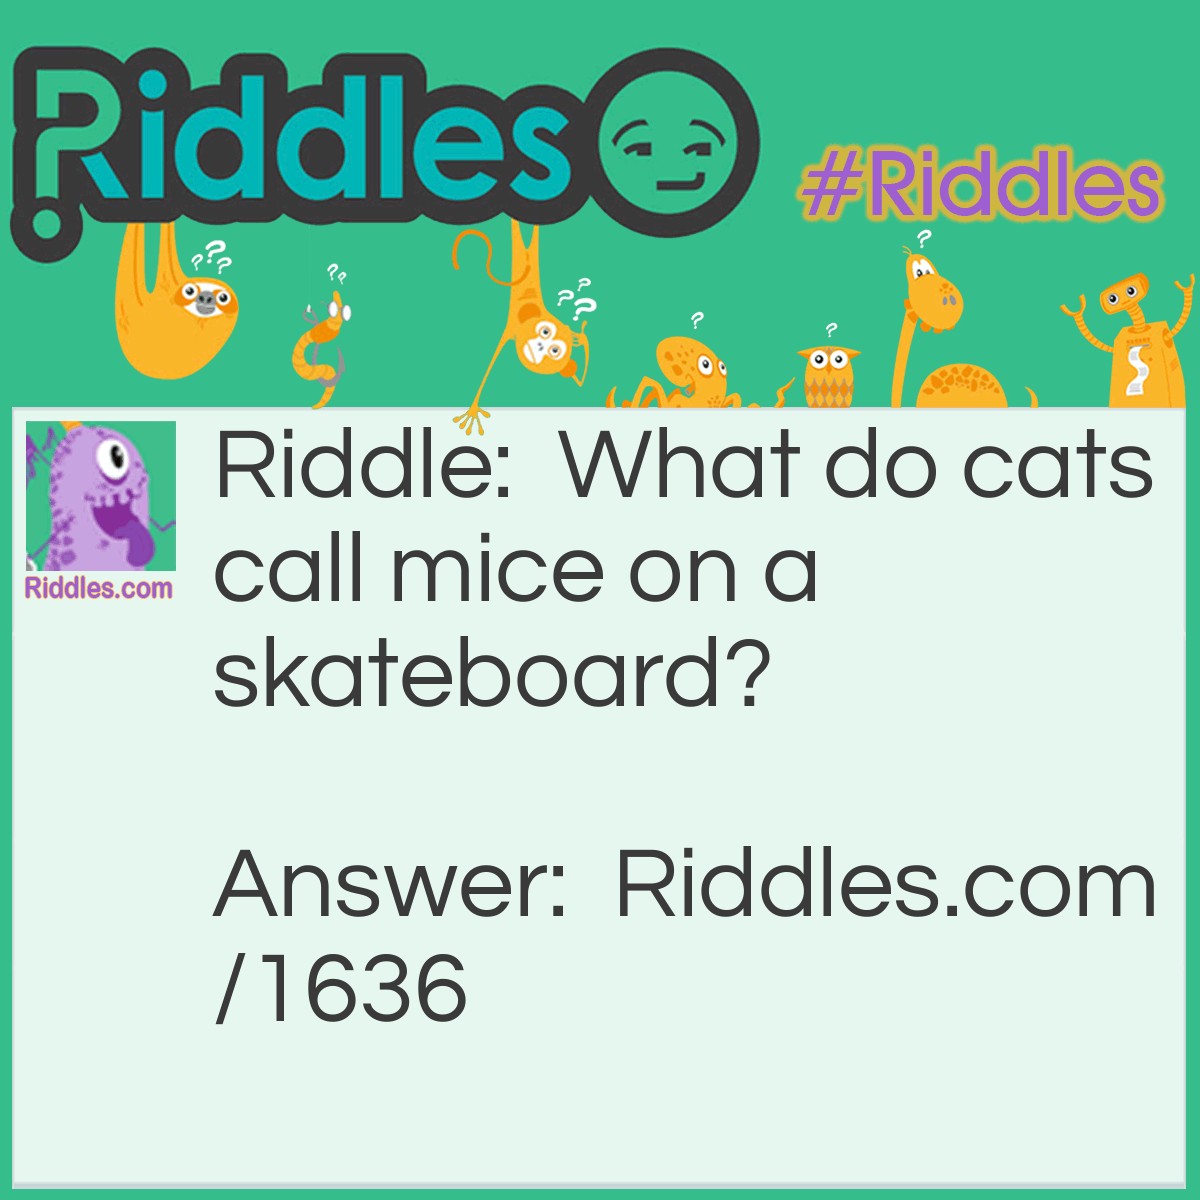 Riddle: What do cats call mice on a skateboard? Answer: Meals on wheels!